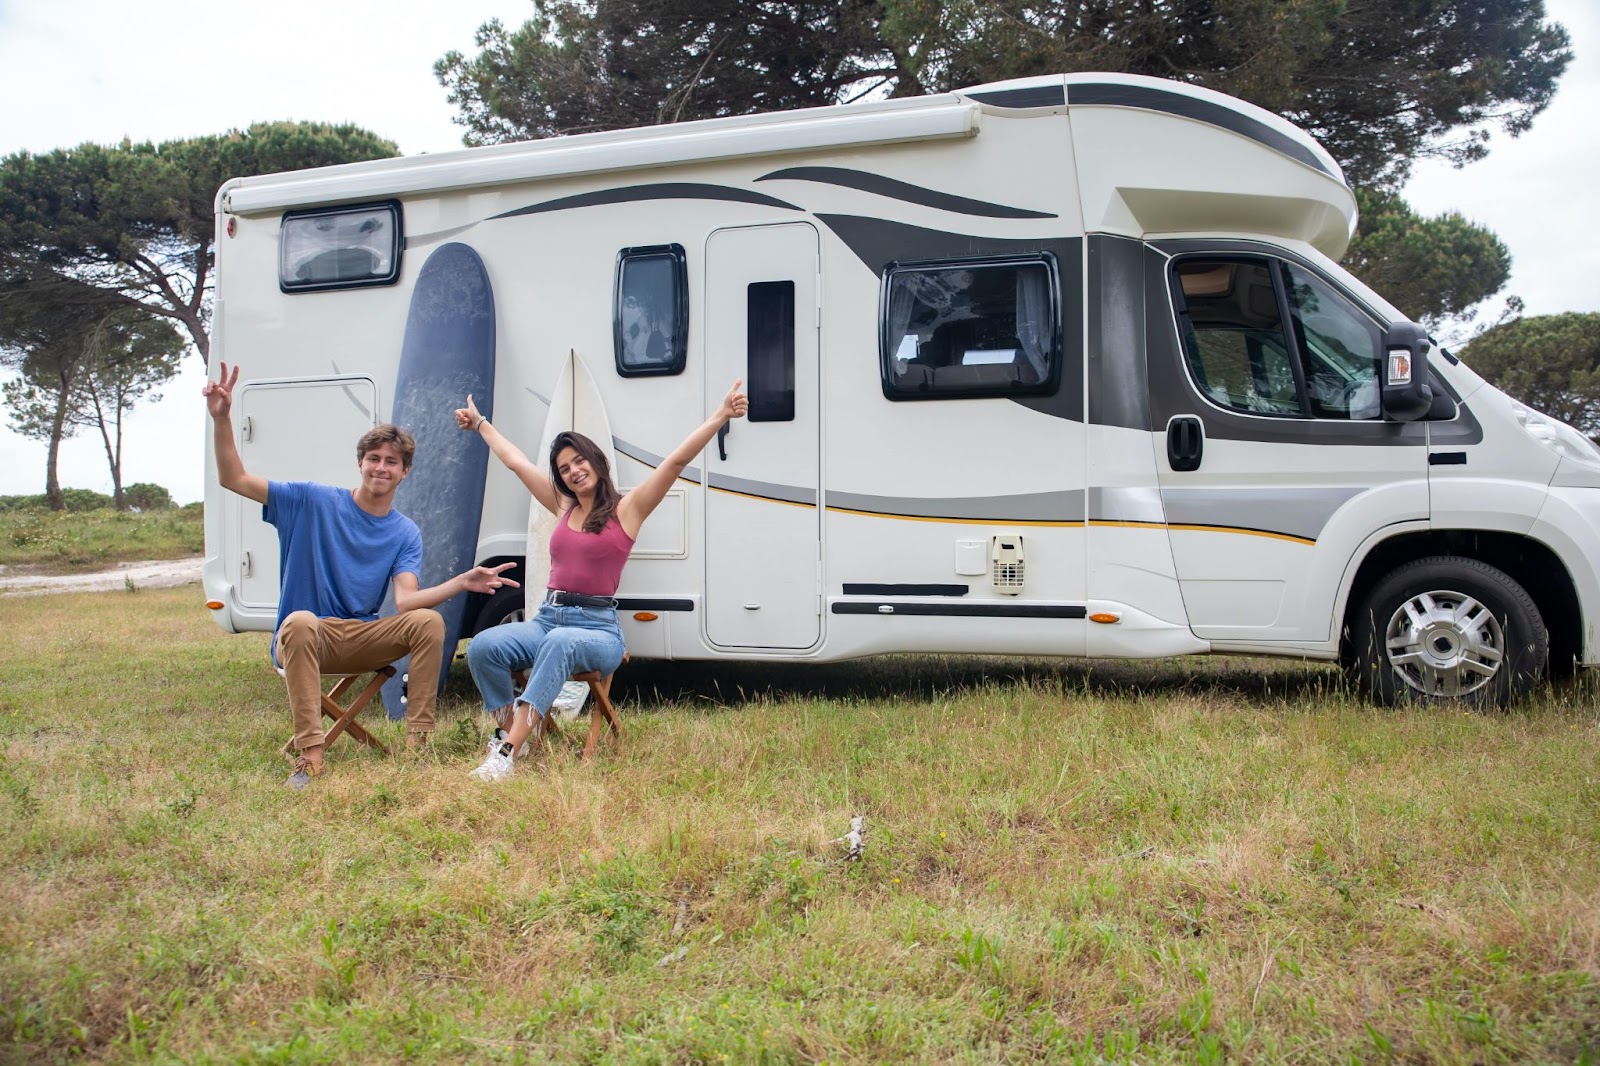 Beginners RV Camping - convectional trailers